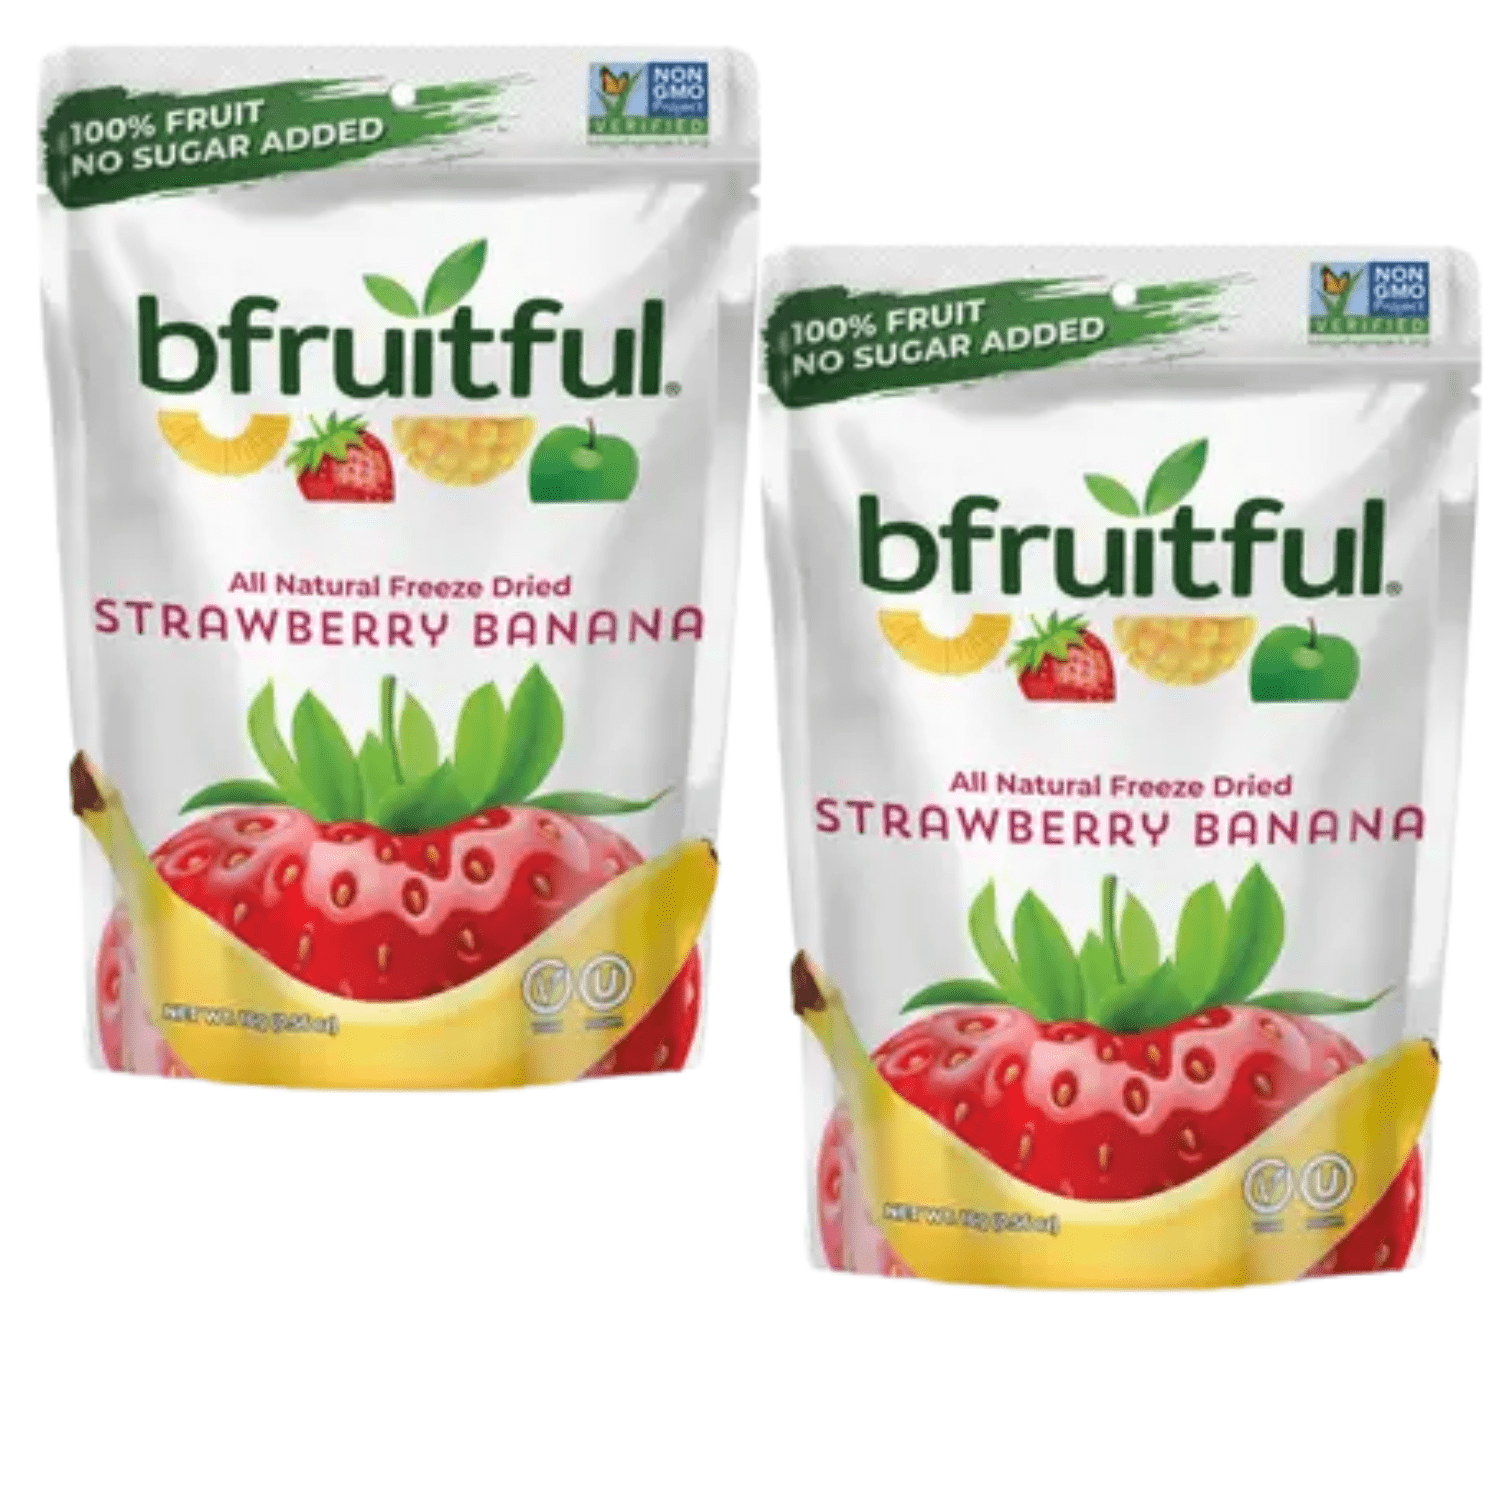 Wel-B Freeze Dried Fruit, Fresh Organic Bananas Freeze Dried to Crispy Chips While Retaining Natural Flavor and Nutrition, Yummy Snacks for Kids and Adults